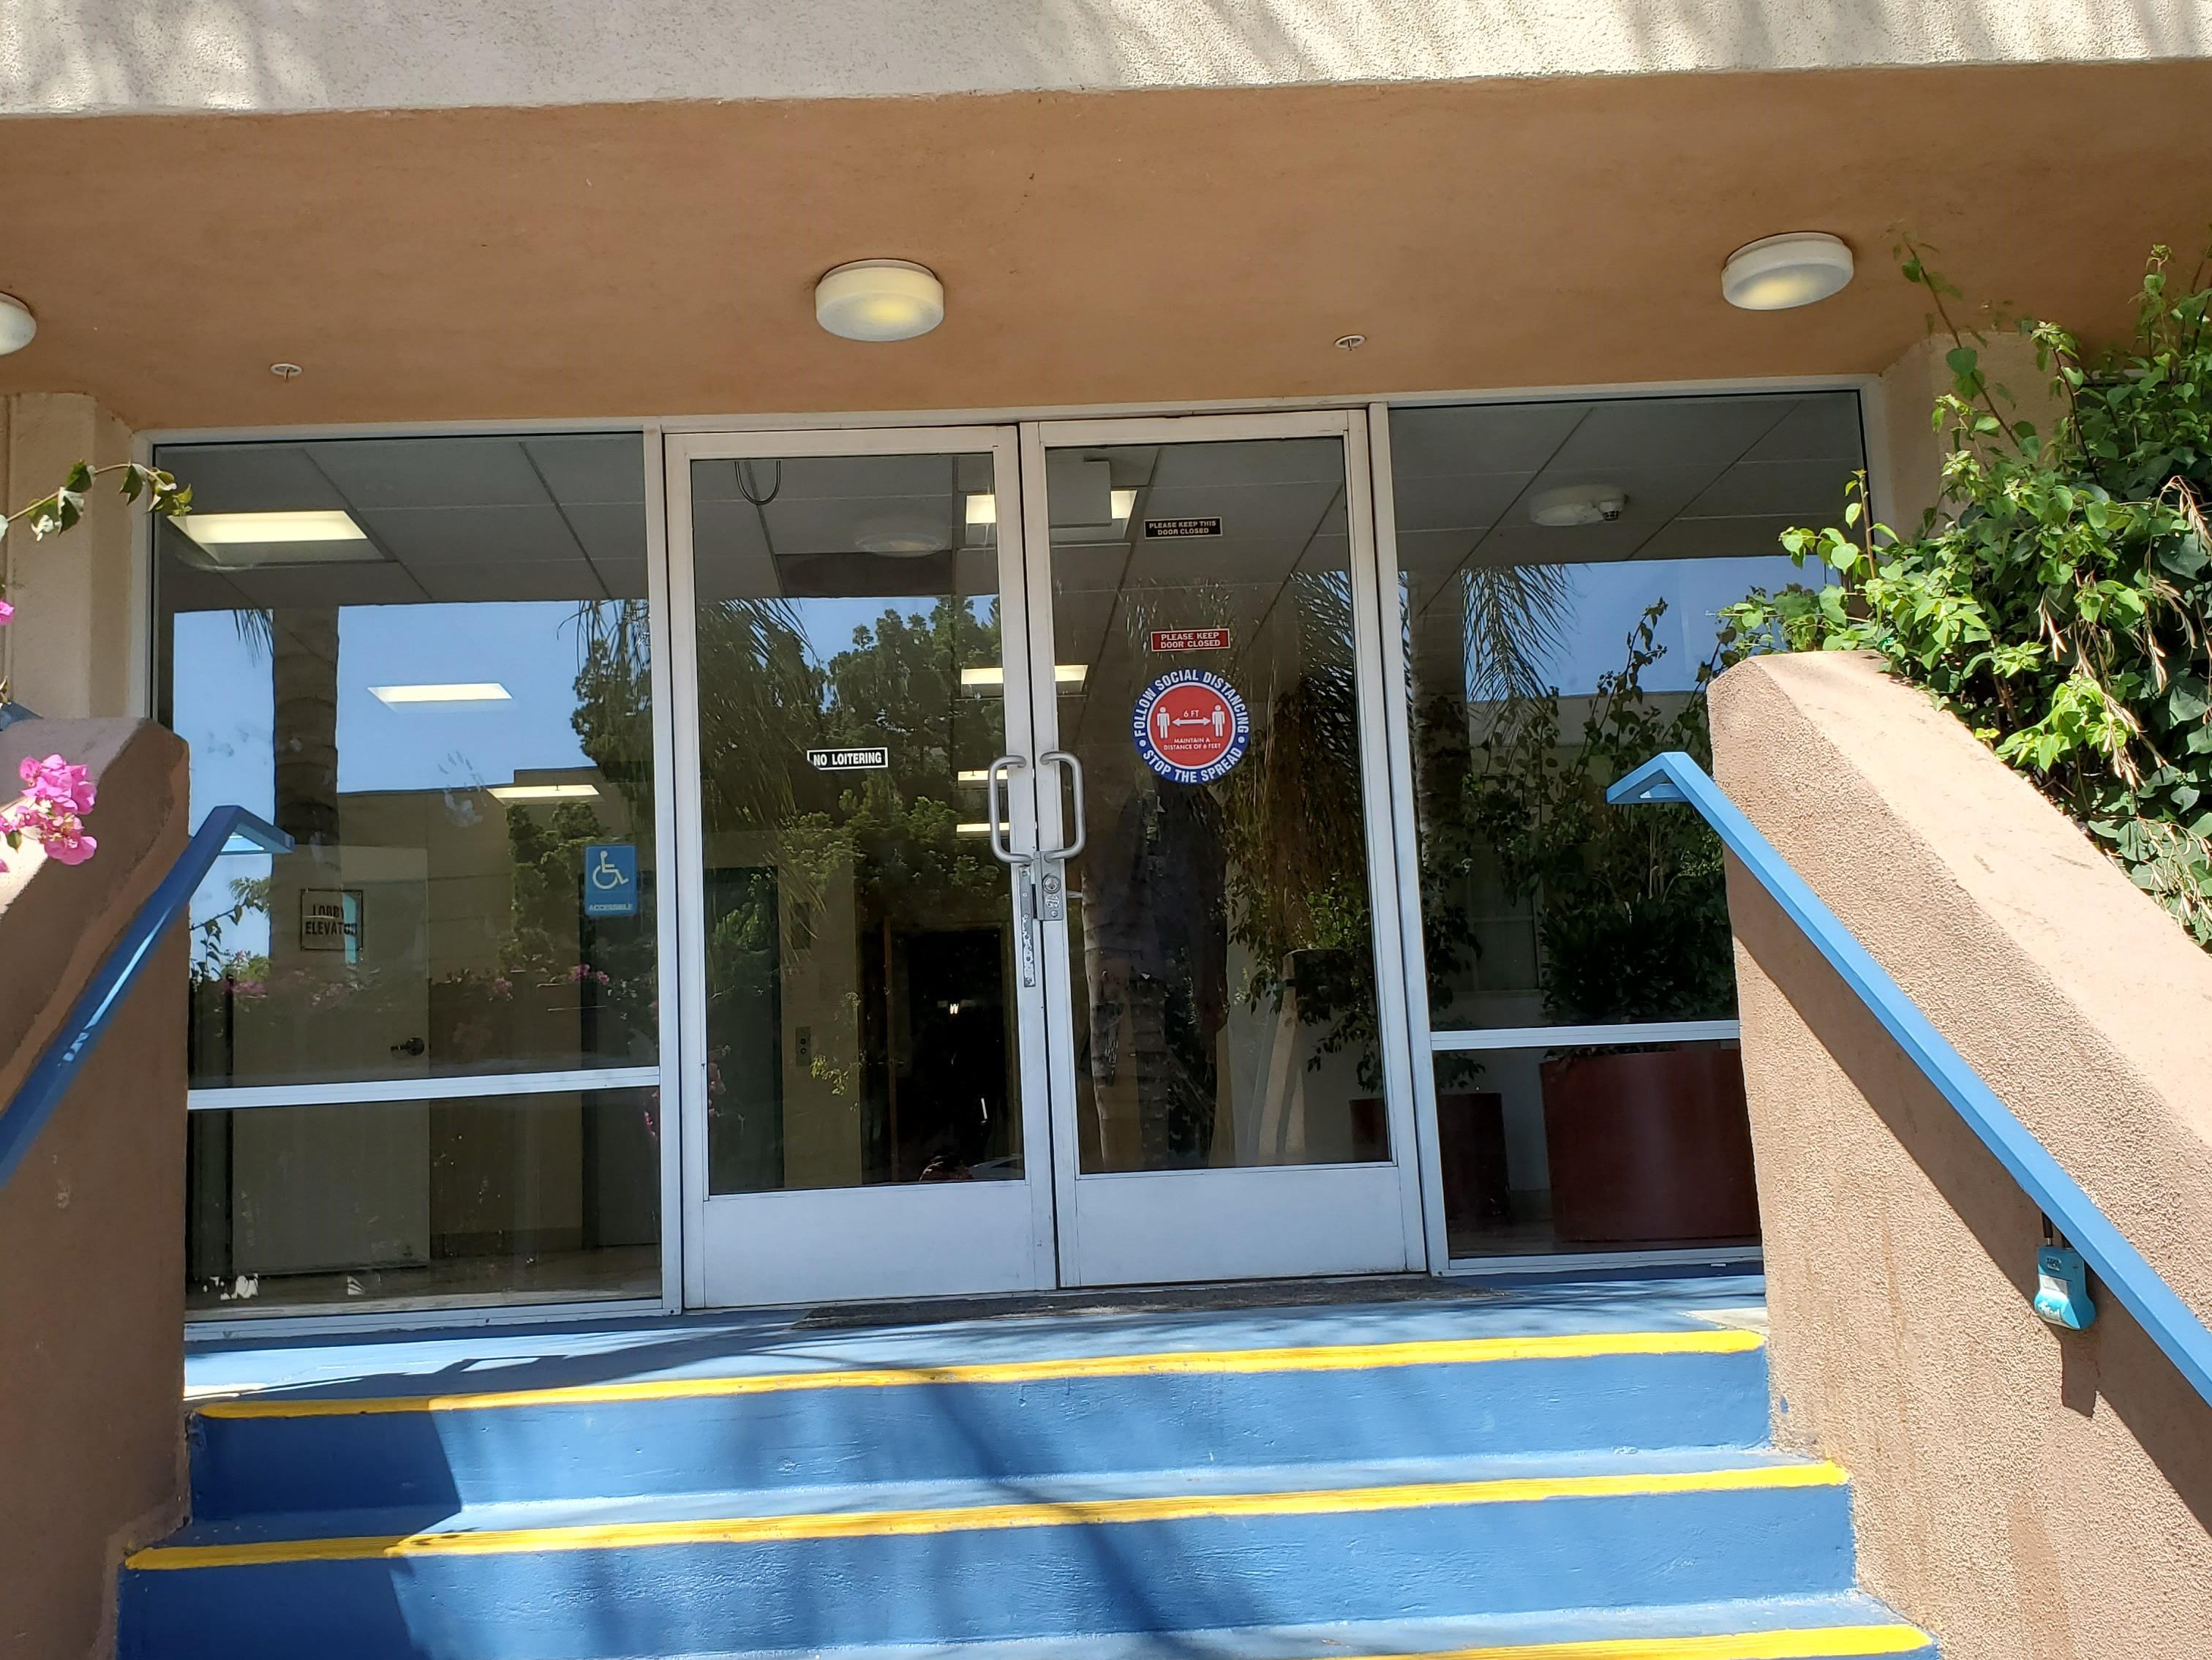 Image of the front entrance of the building